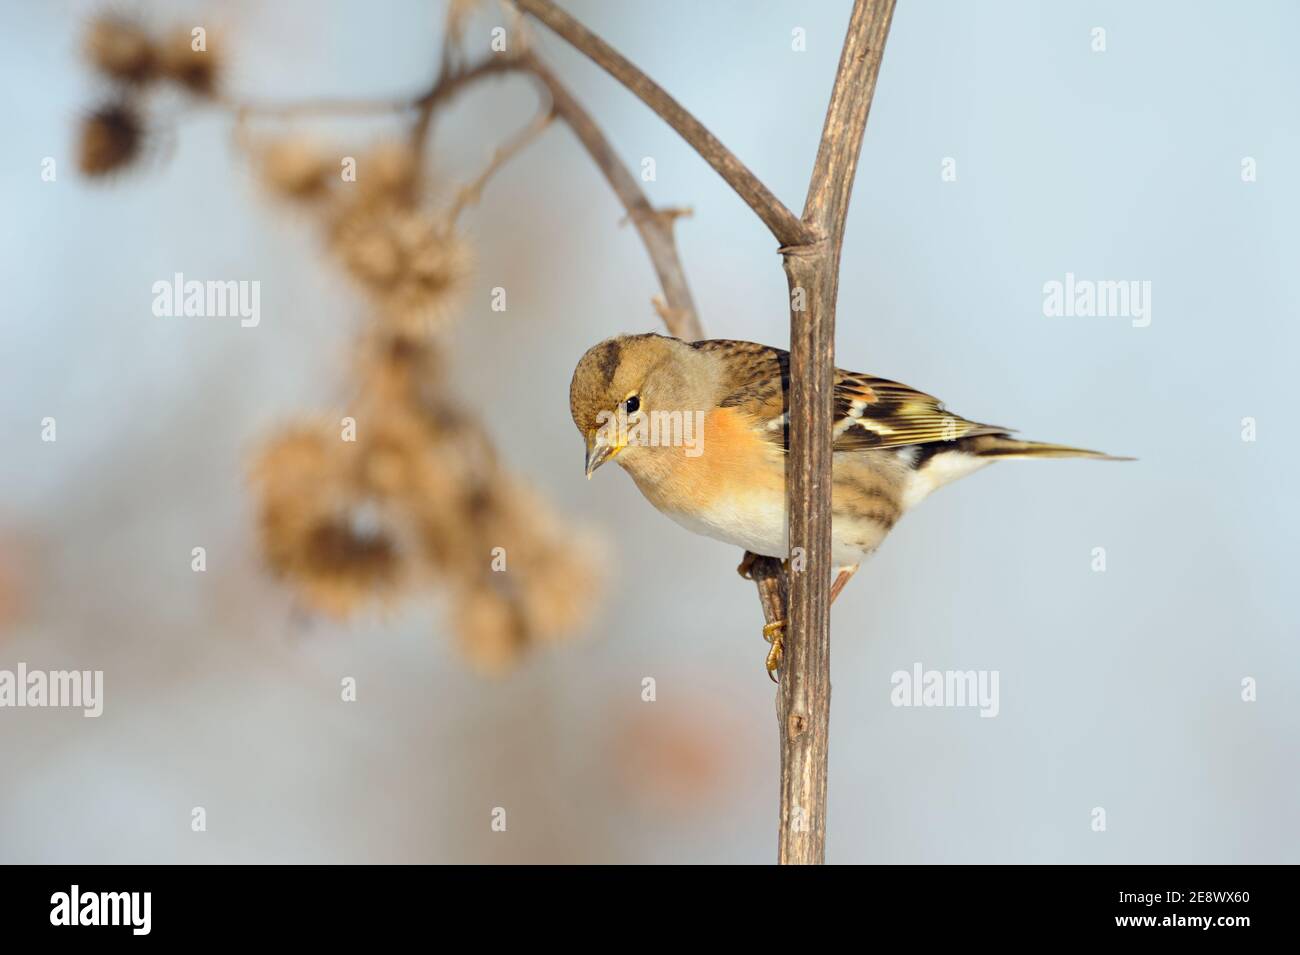 Brambling ( Fringilla montifringilla  ), typical migratory bird, perched on the stem of a burdock, searching for food, seeds, wildlife, Europe. Stock Photo